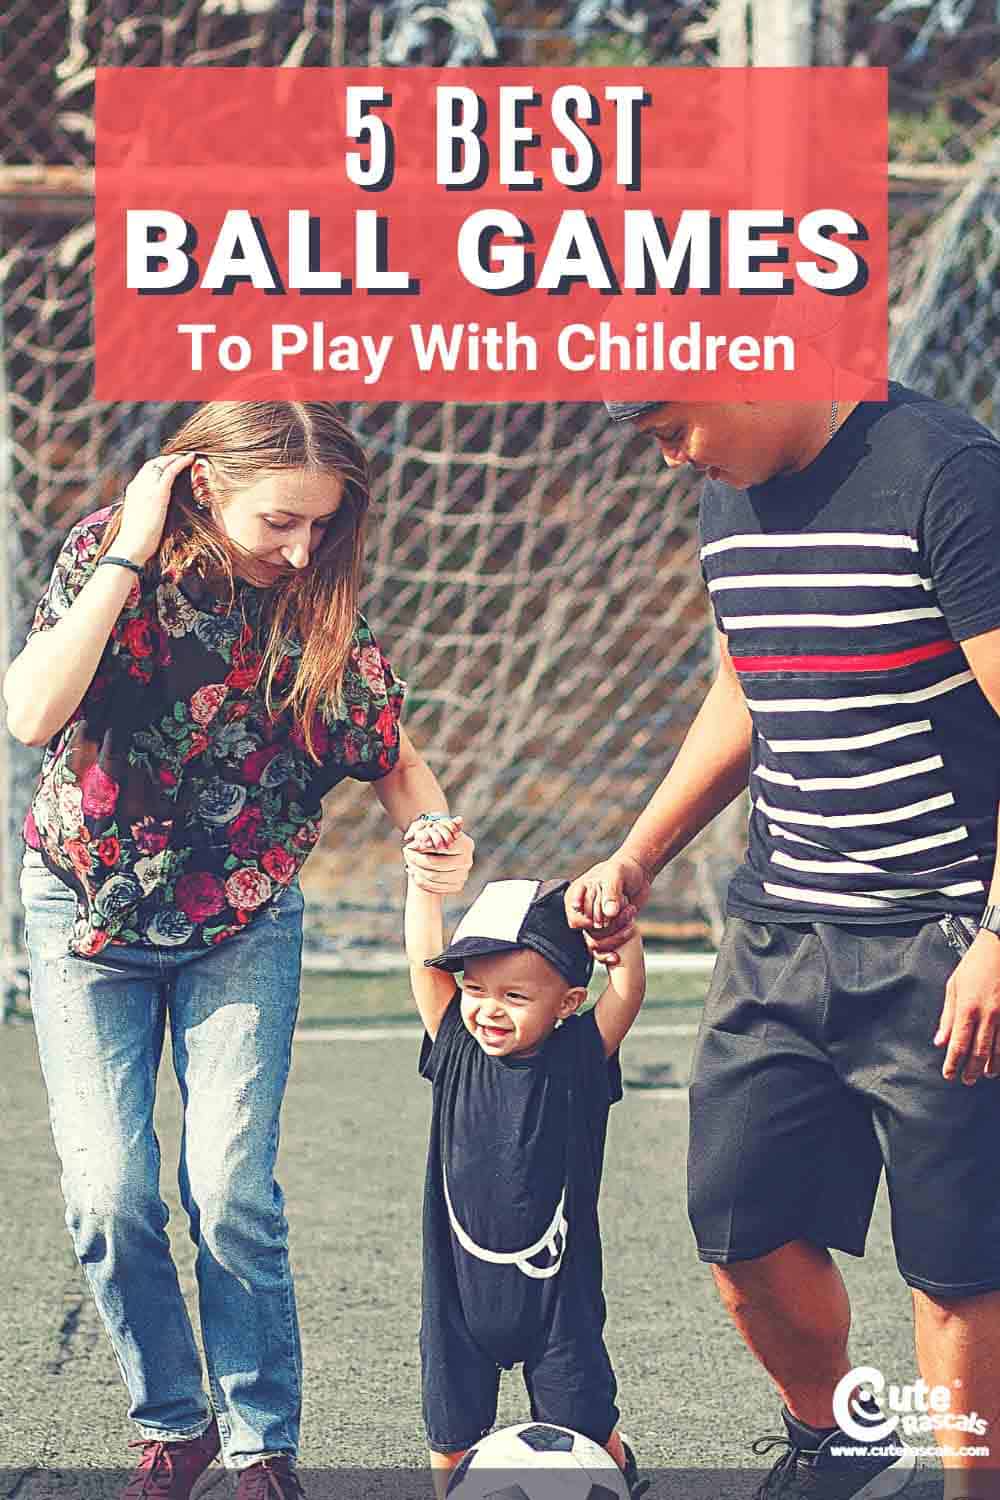 5 Best Ball Games to Play With Children